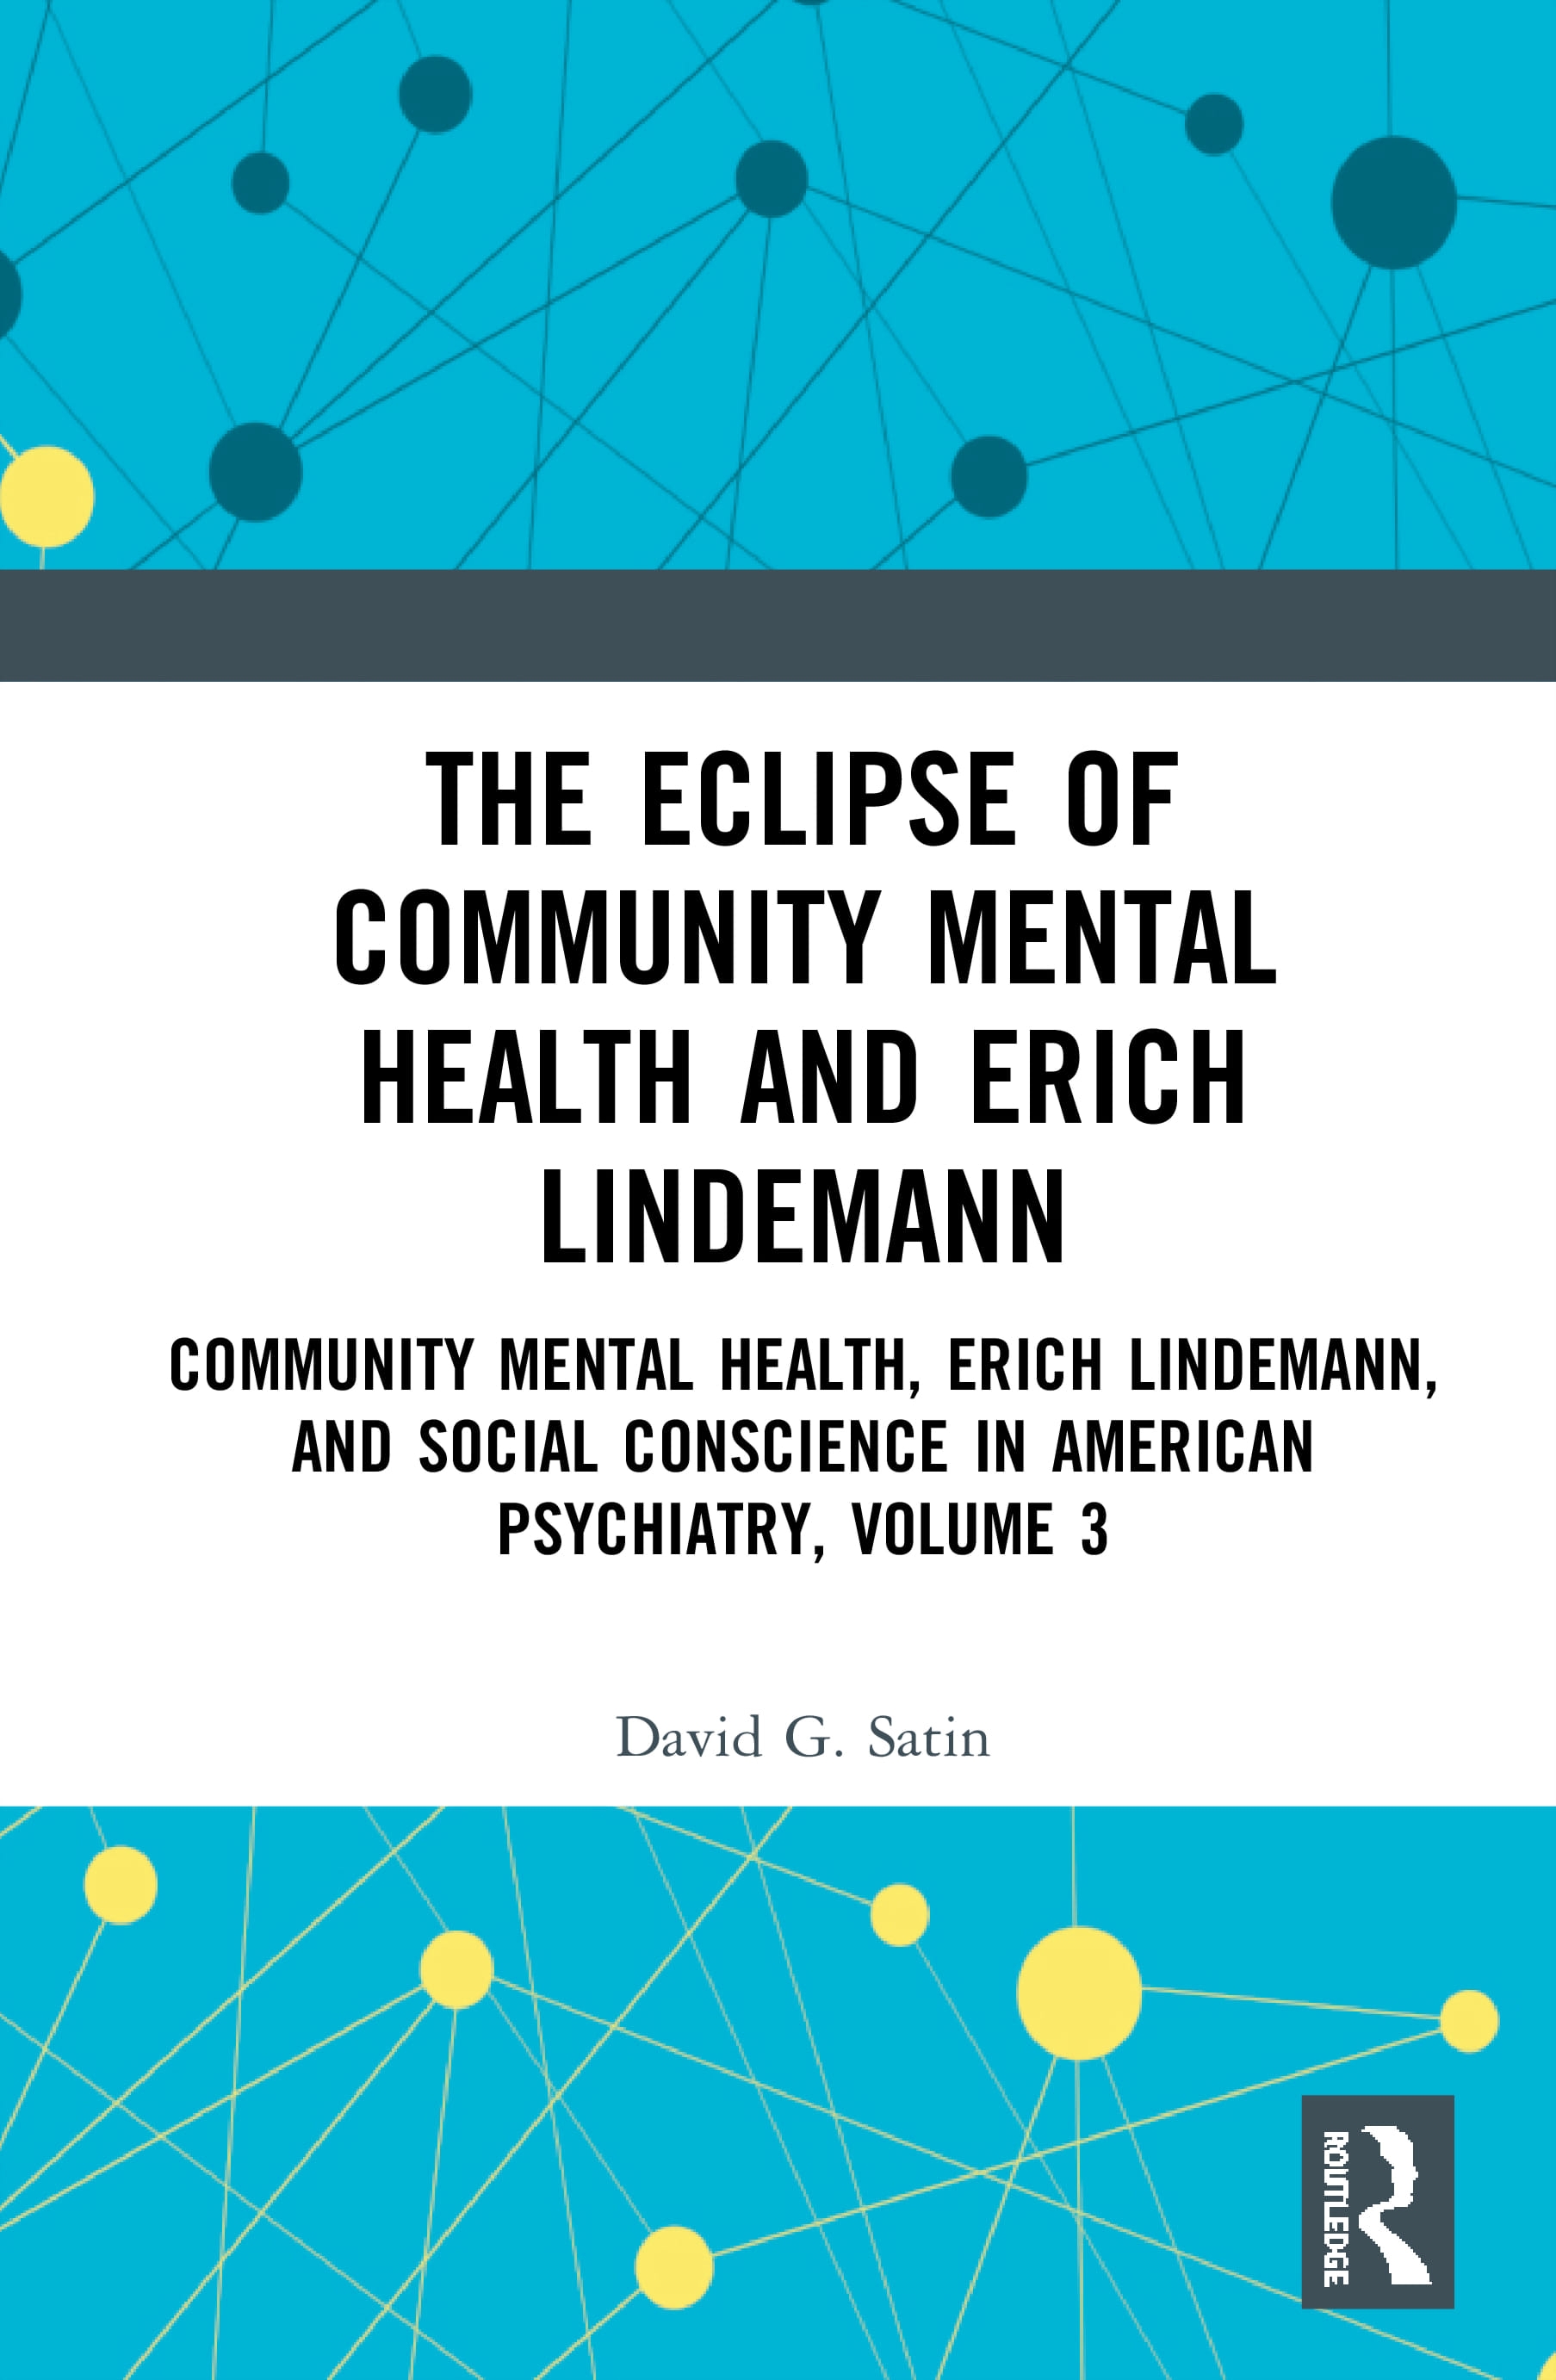 The Eclipse of Community Mental Health and Erich Lindemann: Community Mental Health, Erich Lindemann, and Social Conscience in American Psychiatry, Vo